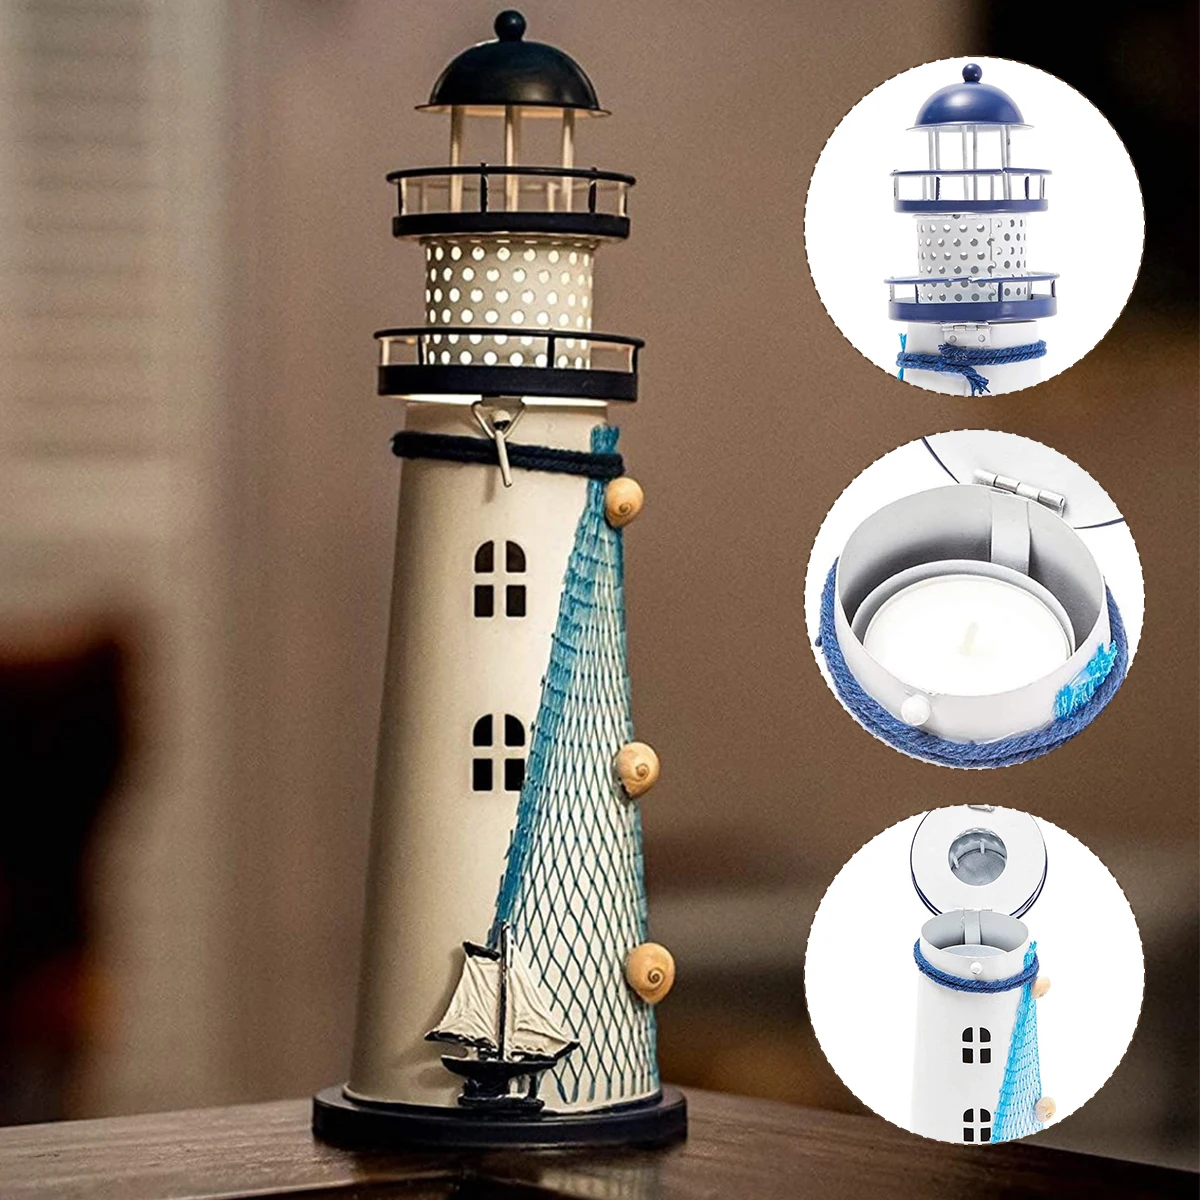 

NEW Metal Lighthouse Decor with Candle Holder Nautical Lighthouse Ornament Decorative Mediterranean Tower Light for Home Desktop